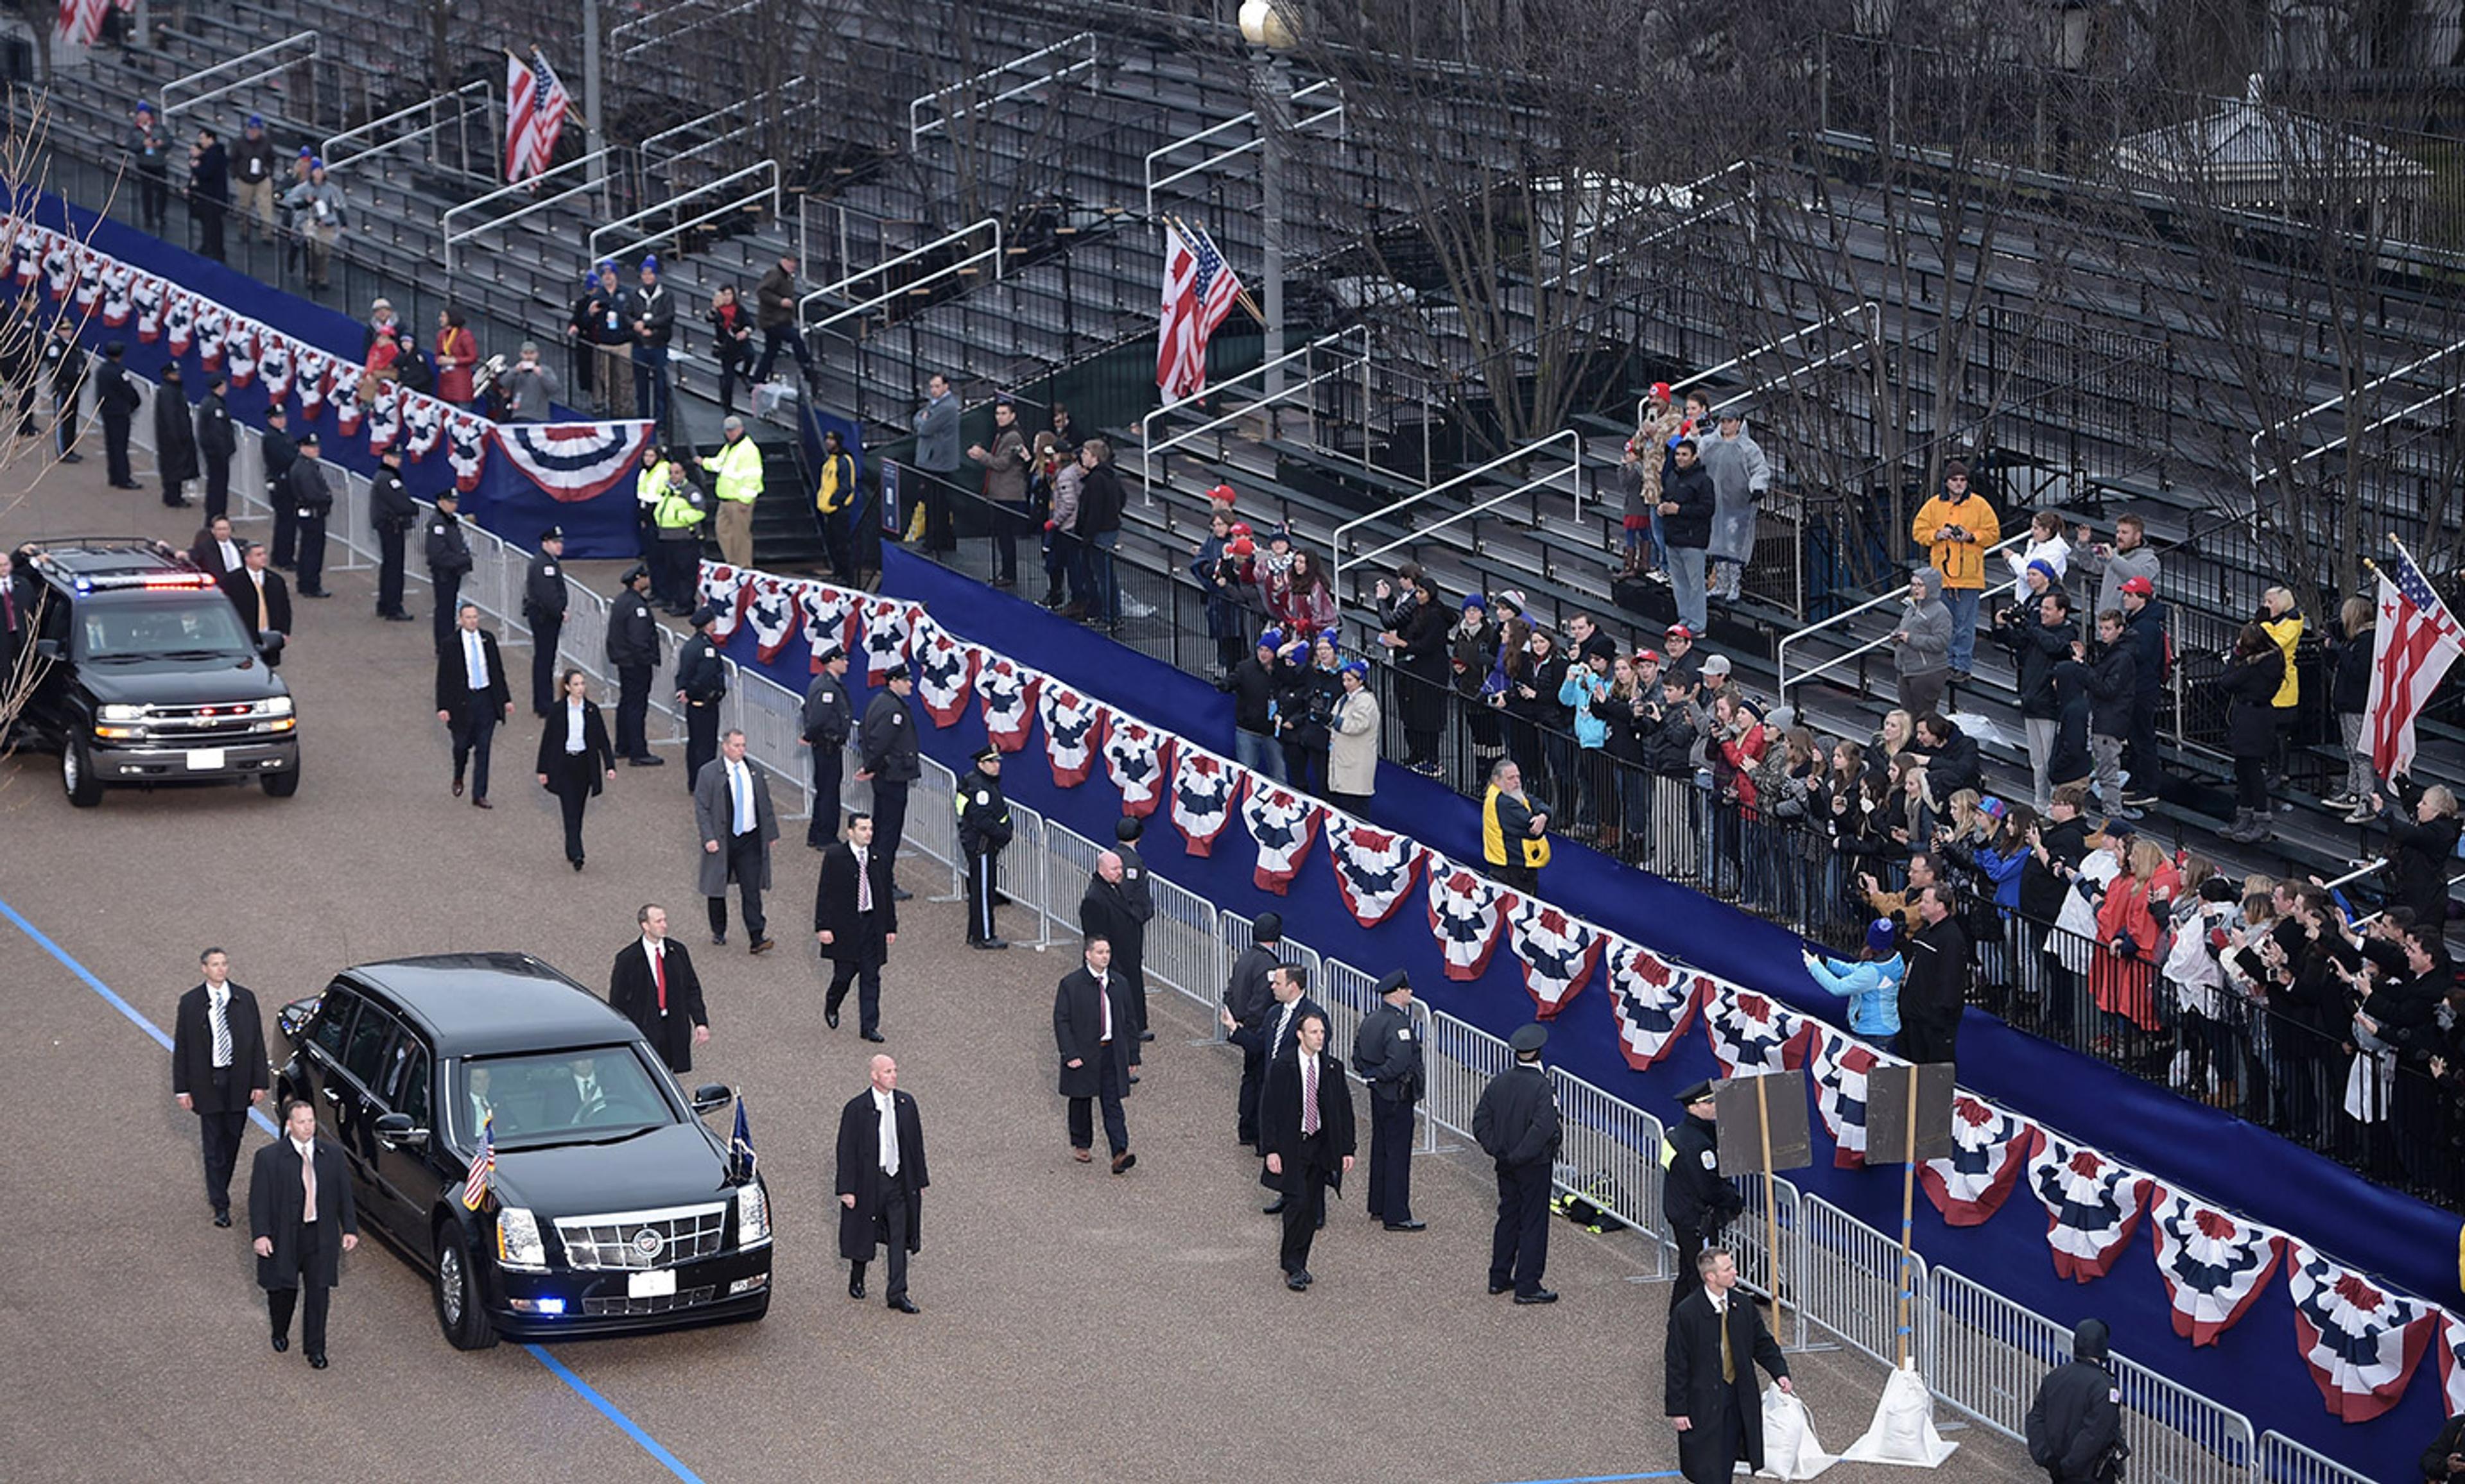 <p>The presidential limousine drives by empty stands in front of the White House during the presidential inaugural parade on 20 January 2017 in Washington, DC. <em>Photo by Getty</em></p>